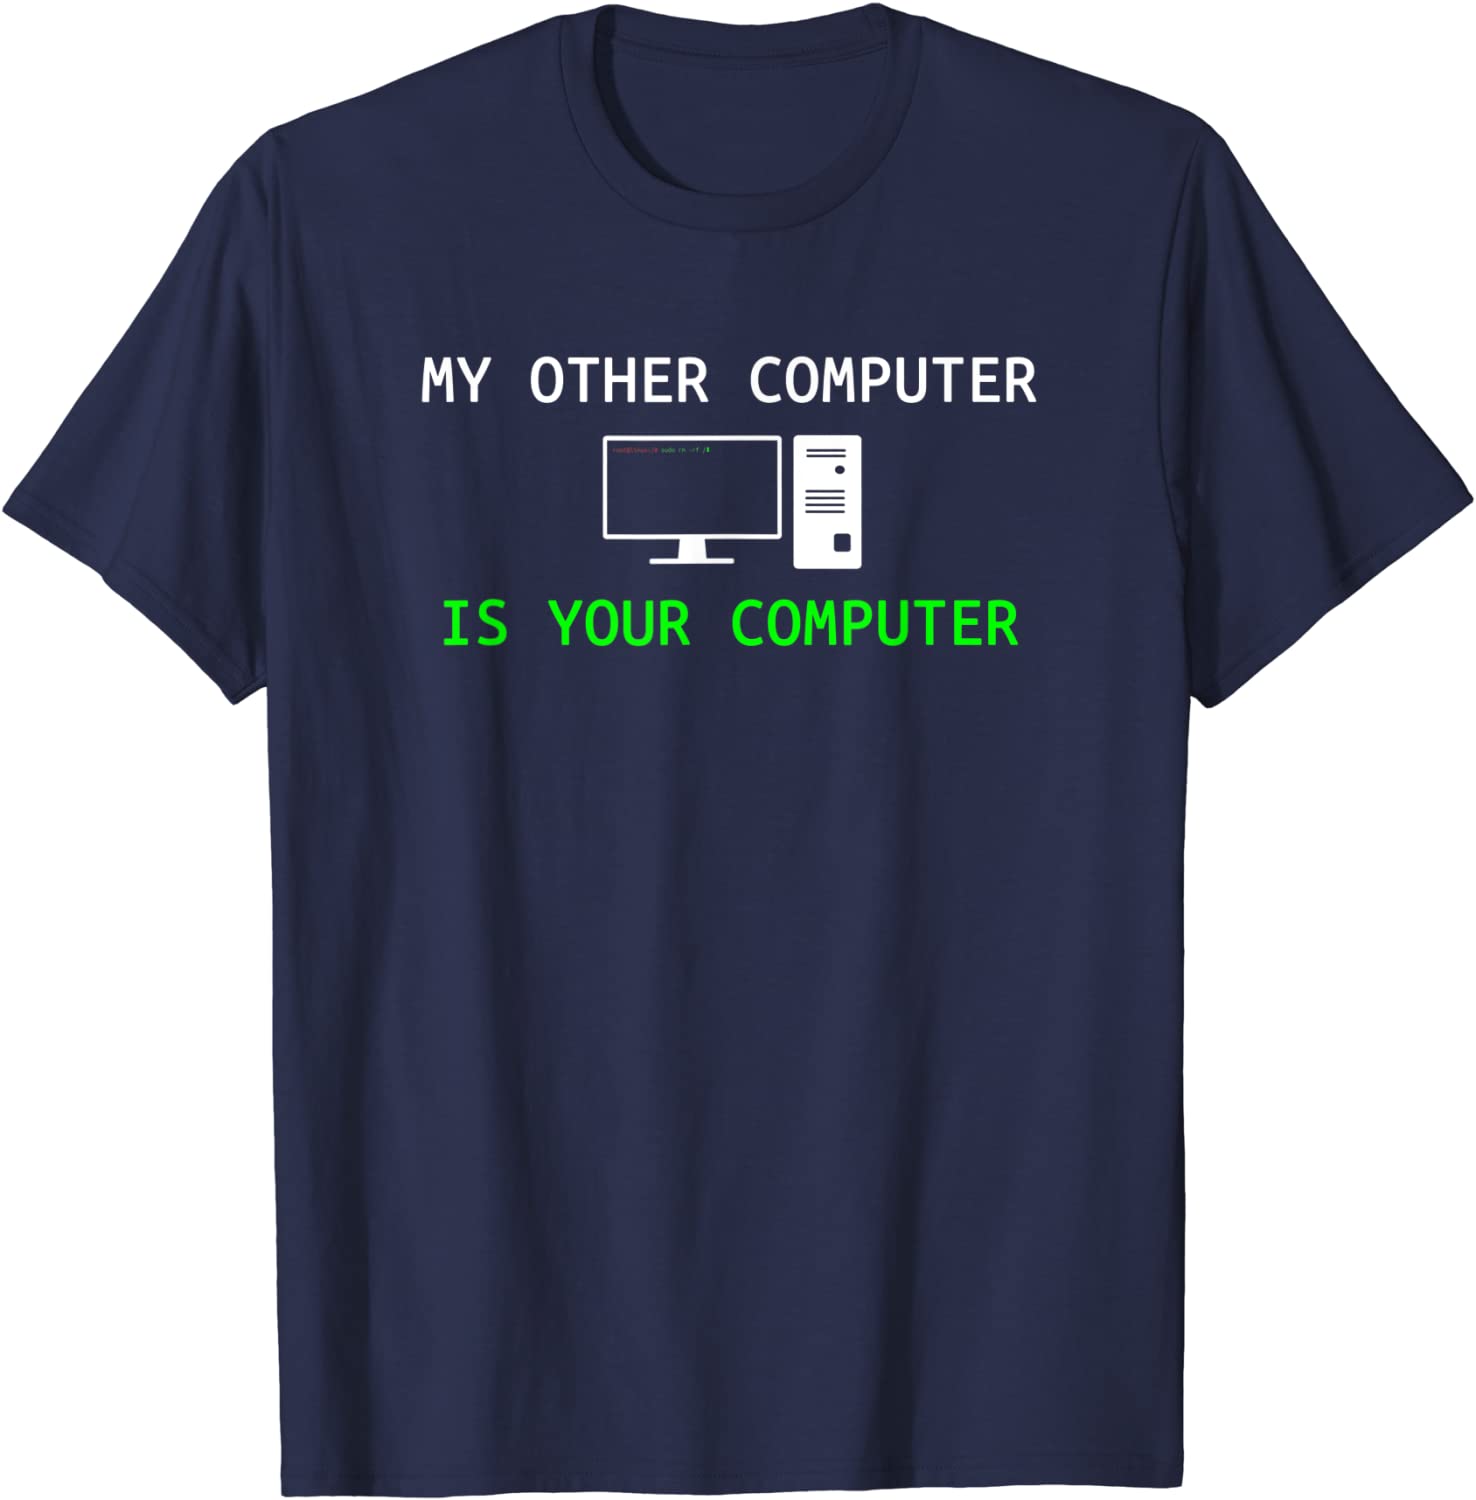 My other computer is your computer | CyberCPU Tech Store